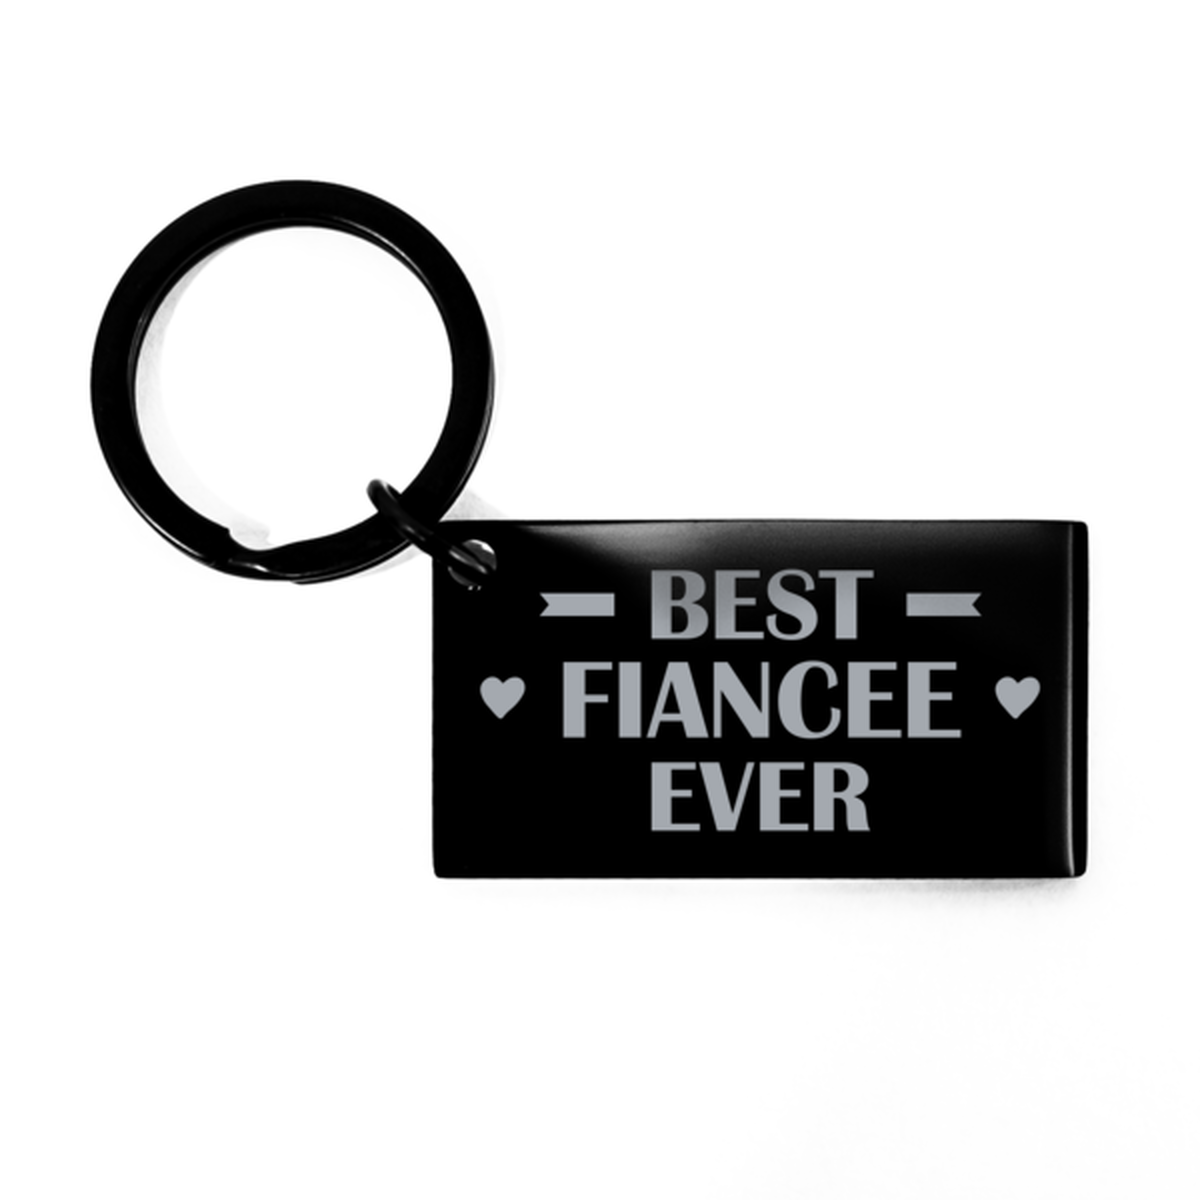 Best Fiancee Ever Fiancee Gifts, Funny Black Keychain For Fiancee, Birthday Engraved Keyring Presents For Women